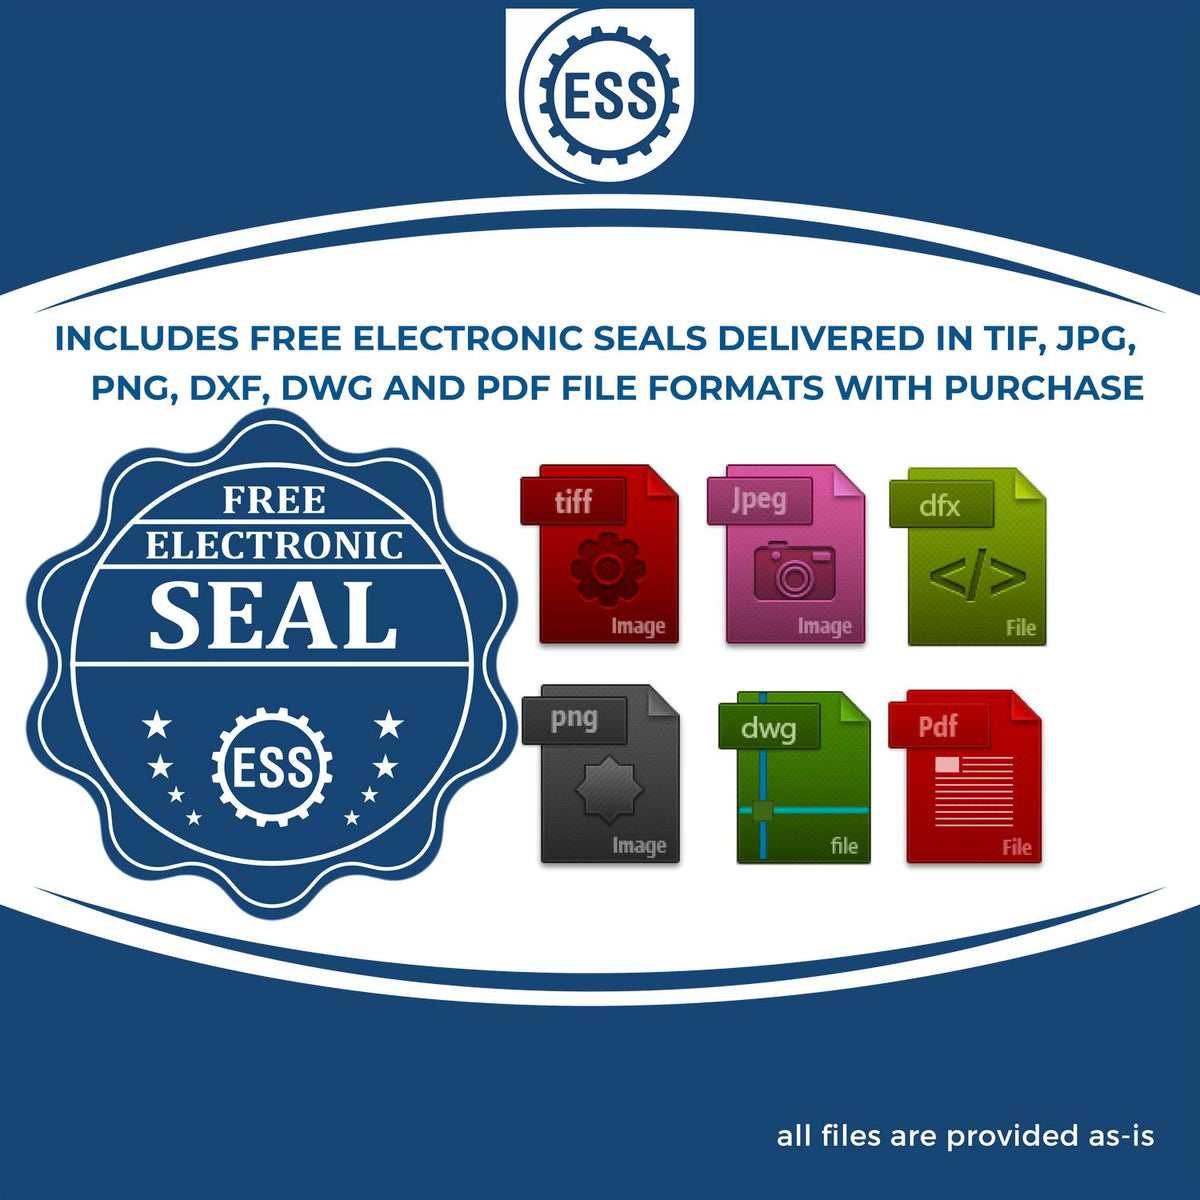 An infographic for the free electronic seal for the Wooden Handle Nebraska State Seal Notary Public Stamp illustrating the different file type icons such as DXF, DWG, TIF, JPG and PNG.